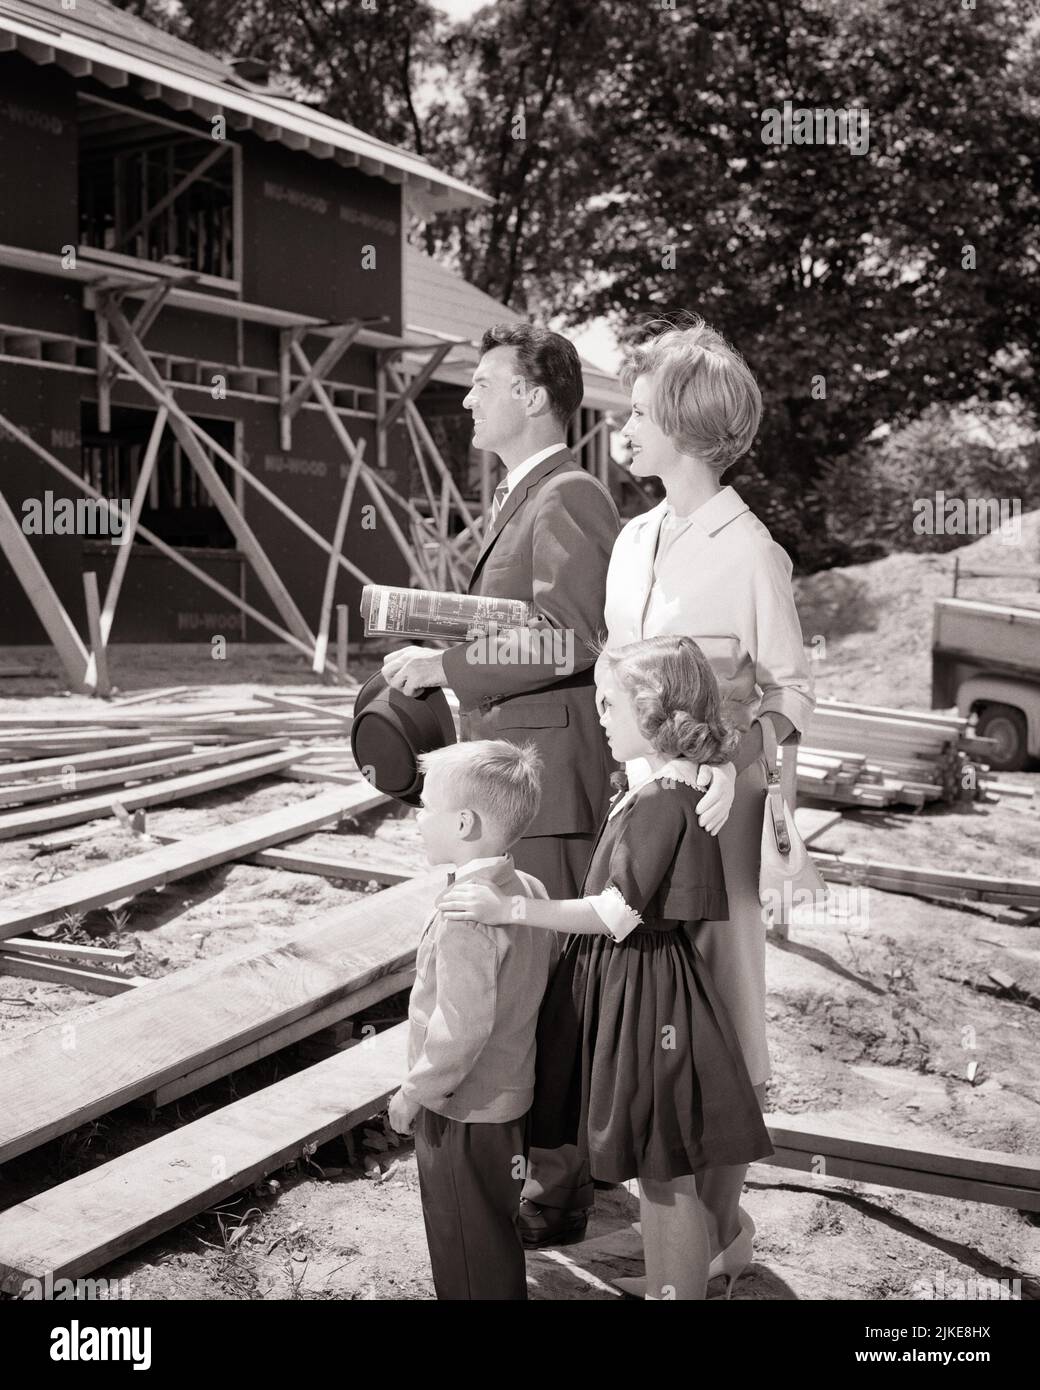 1960s FAMILY OF 4 STANDING ON CONSTRUCTION SITE OF THEIR SOON TO BE NEW HOUSE MOTHER FATHER TWO KIDS BOY GIRL - j9090 HAR001 HARS FUTURE NOSTALGIA BROTHER OLD FASHION SISTER JUVENILE STYLE DESIGN SONS FAMILIES JOY LIFESTYLE SATISFACTION ARCHITECTURE FEMALES HOUSES MARRIED BROTHERS SITE SPOUSE HUSBANDS HEALTHINESS HOME LIFE COPY SPACE HALF-LENGTH LADIES DAUGHTERS PERSONS INSPIRATION RESIDENTIAL MALES BUILDINGS SIBLINGS SISTERS B&W PARTNER GOALS SUCCESS DREAMS STRUCTURE HAPPINESS SOON ADVENTURE EXCITEMENT PROGRESS OPPORTUNITY HOMES SIBLING NUCLEAR FAMILY CONCEPTUAL RESIDENCE MID-ADULT Stock Photo